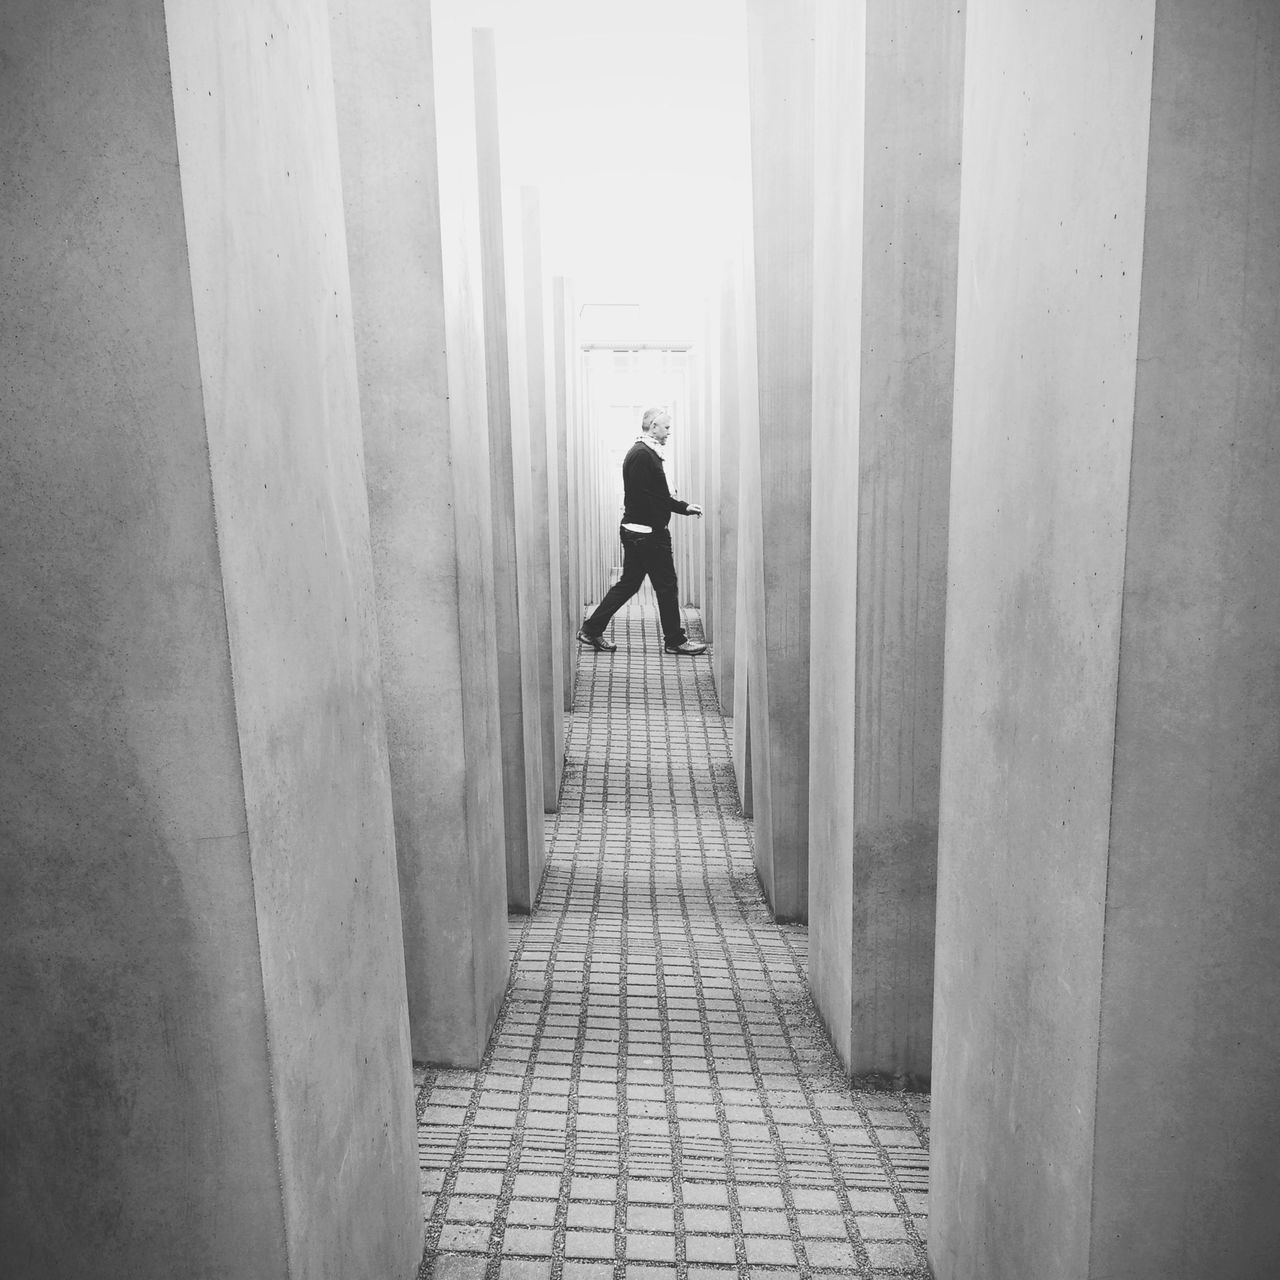 the way forward, architecture, rear view, built structure, walking, full length, lifestyles, men, building exterior, person, corridor, leisure activity, walkway, standing, wall - building feature, day, diminishing perspective, narrow